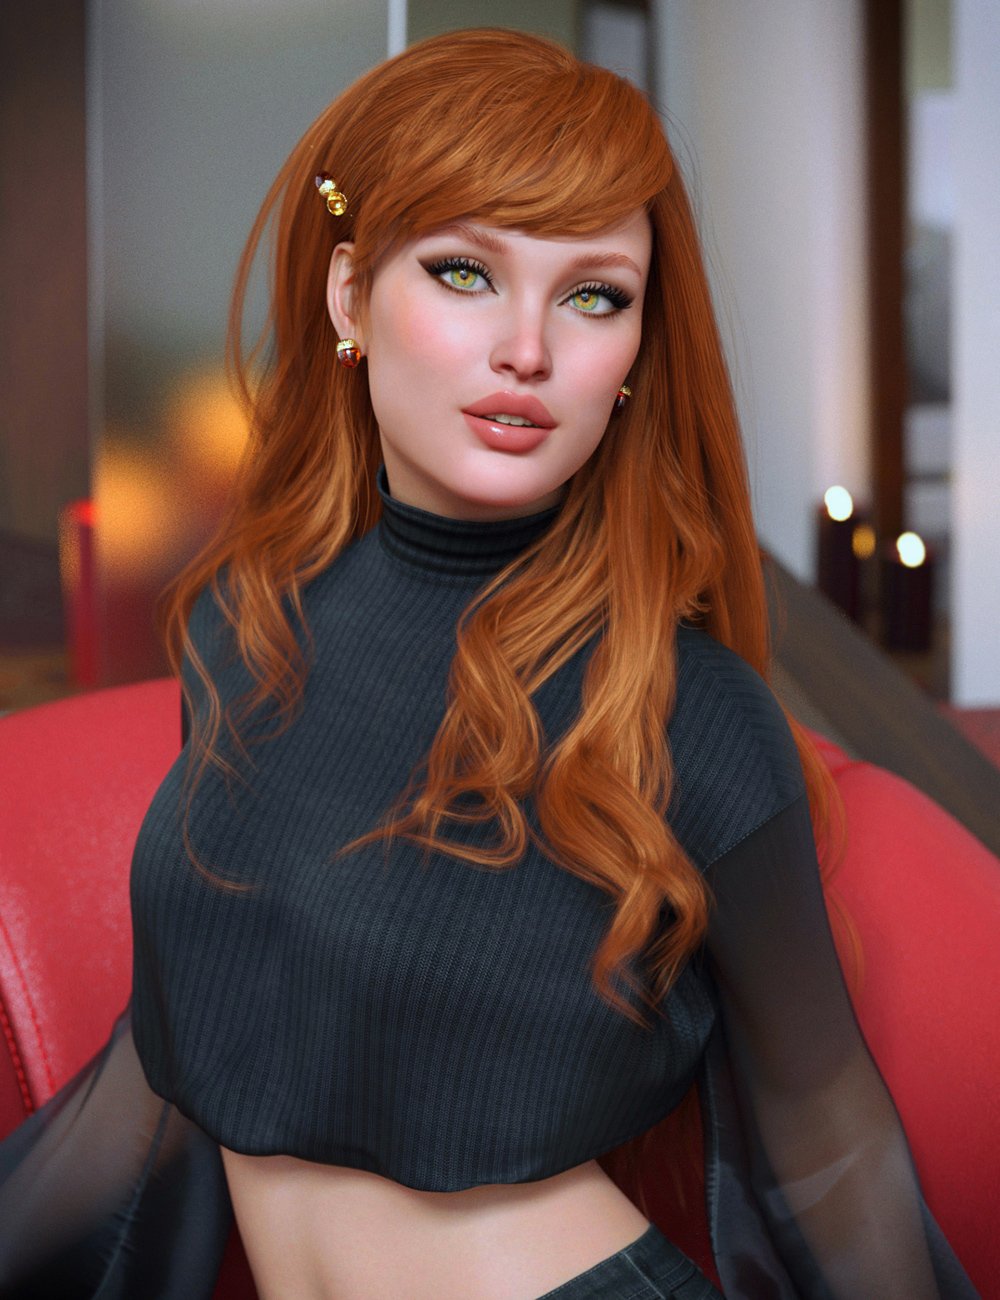 Addy Leigh for Genesis 8 Female by: addy, 3D Models by Daz 3D